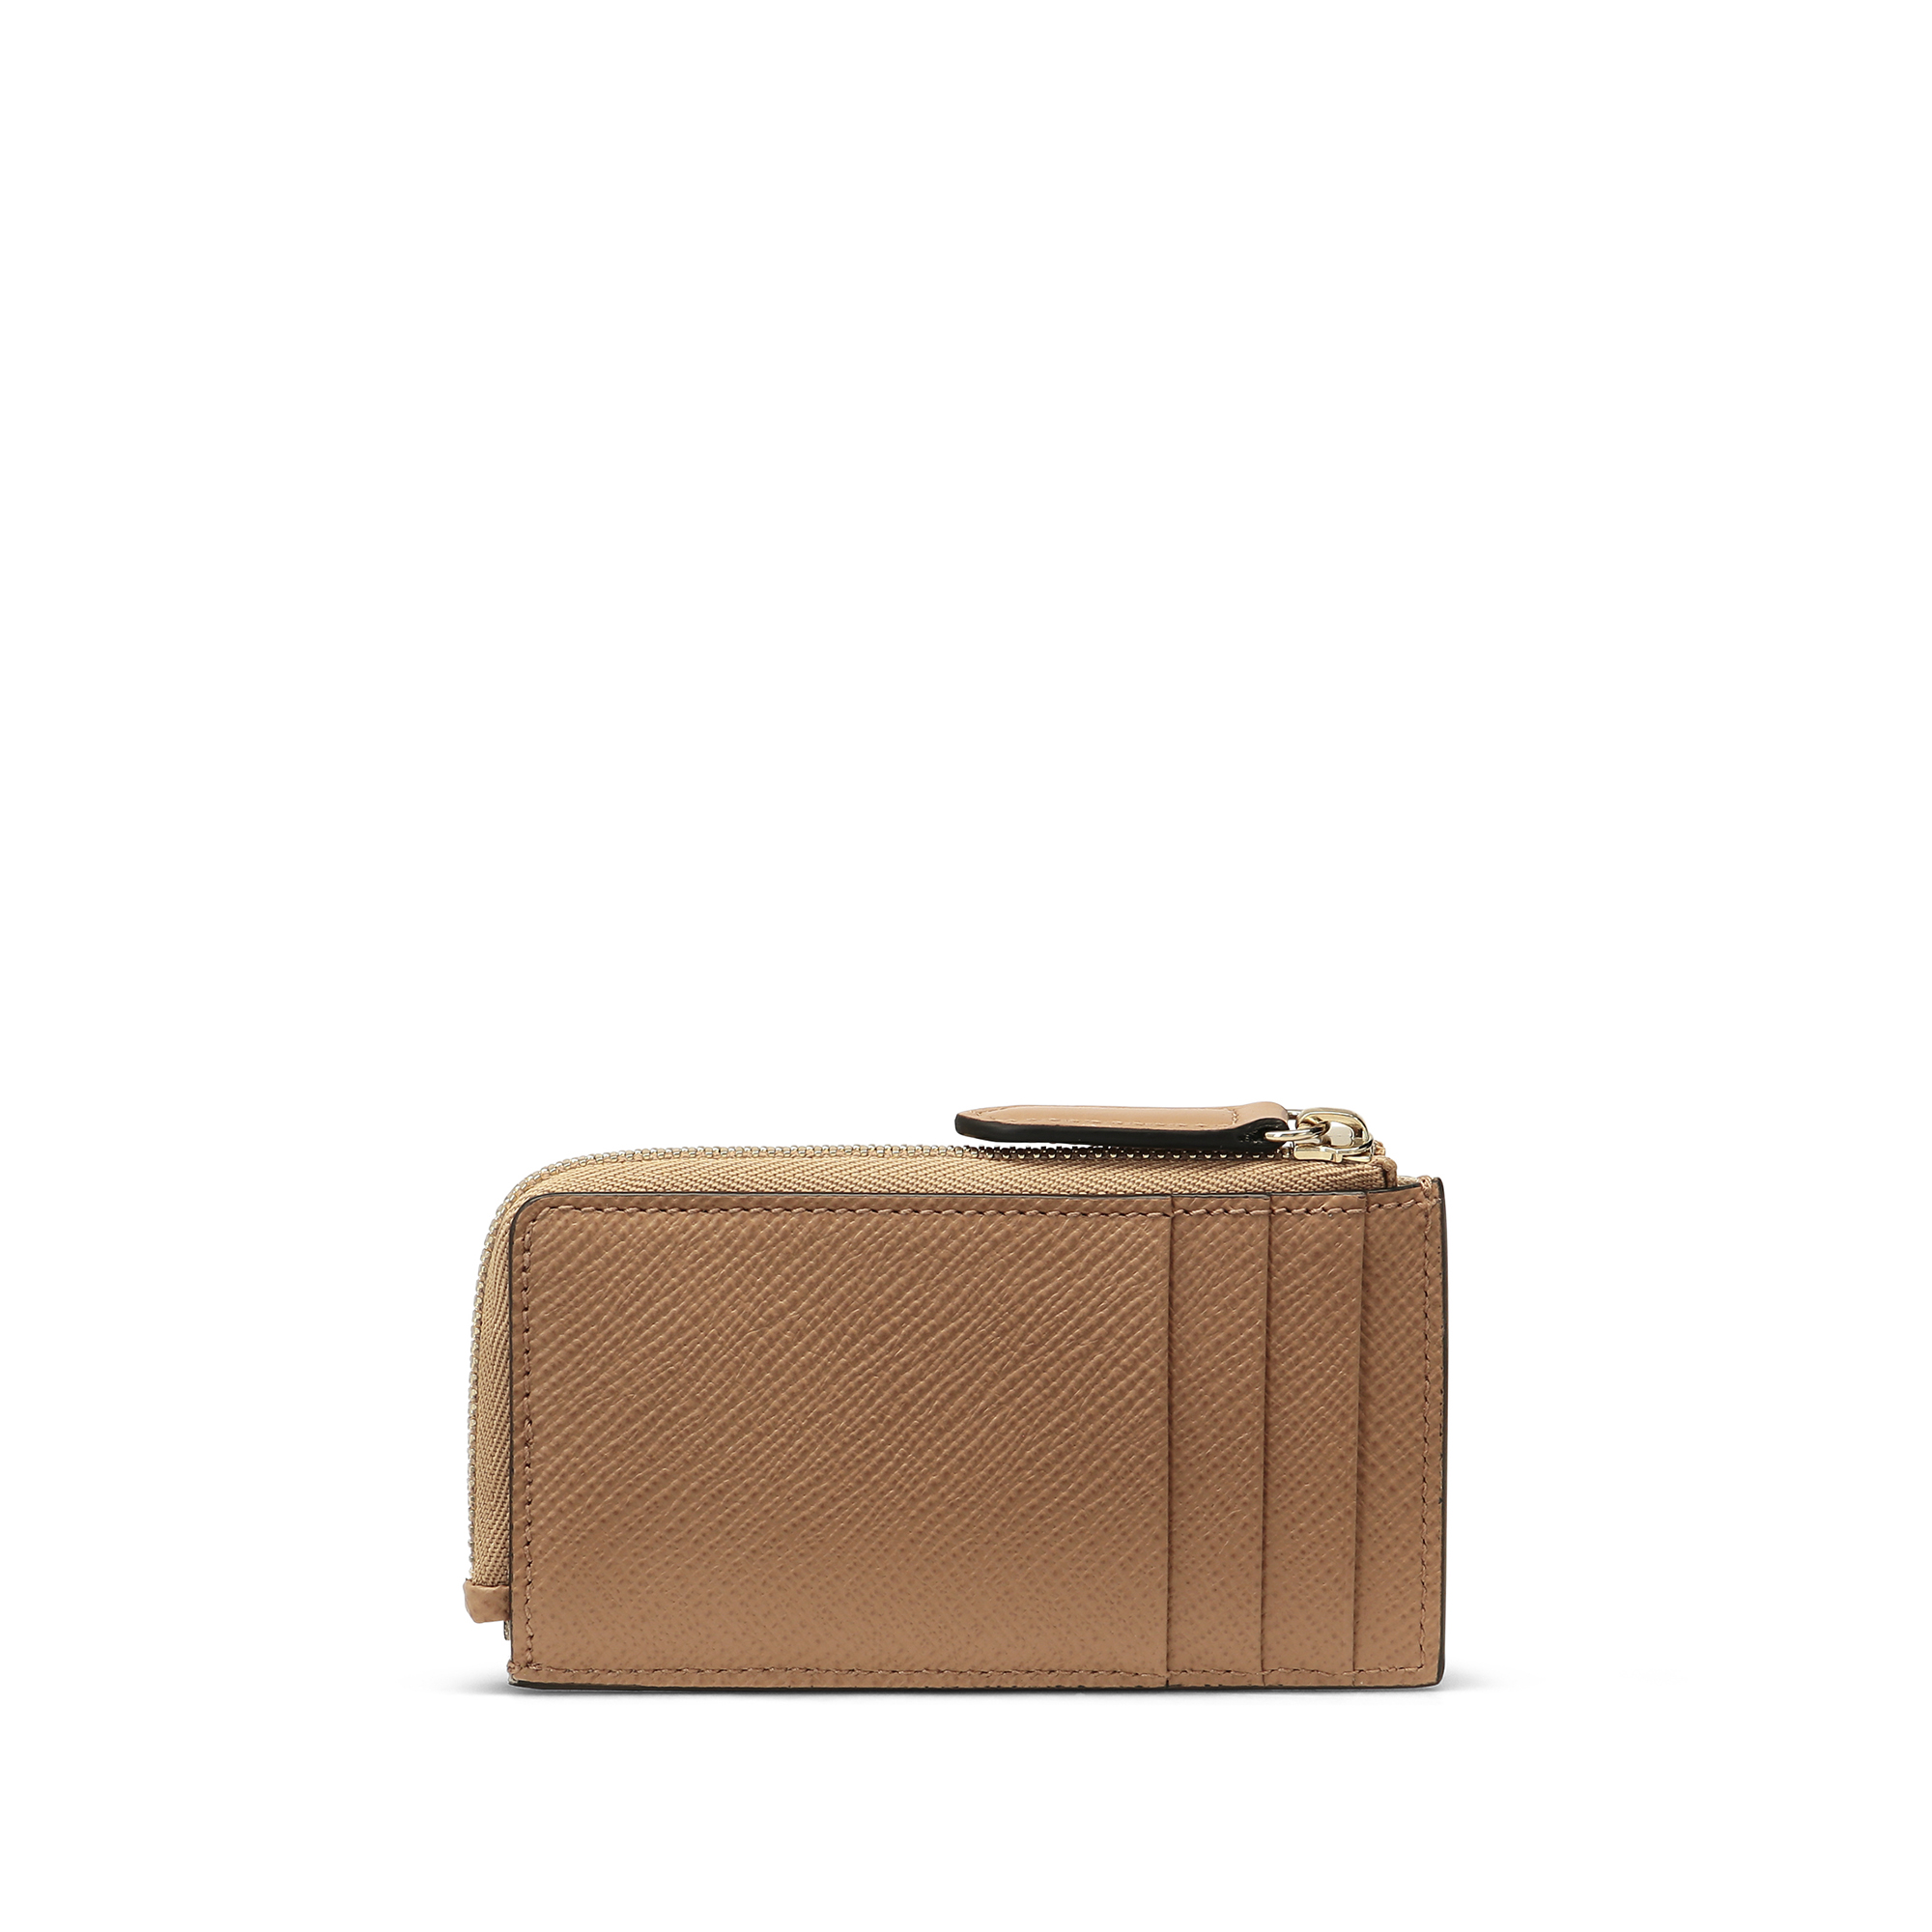 Smythson 3 Card Slot Coin Purse In Panama In Light Rosewood